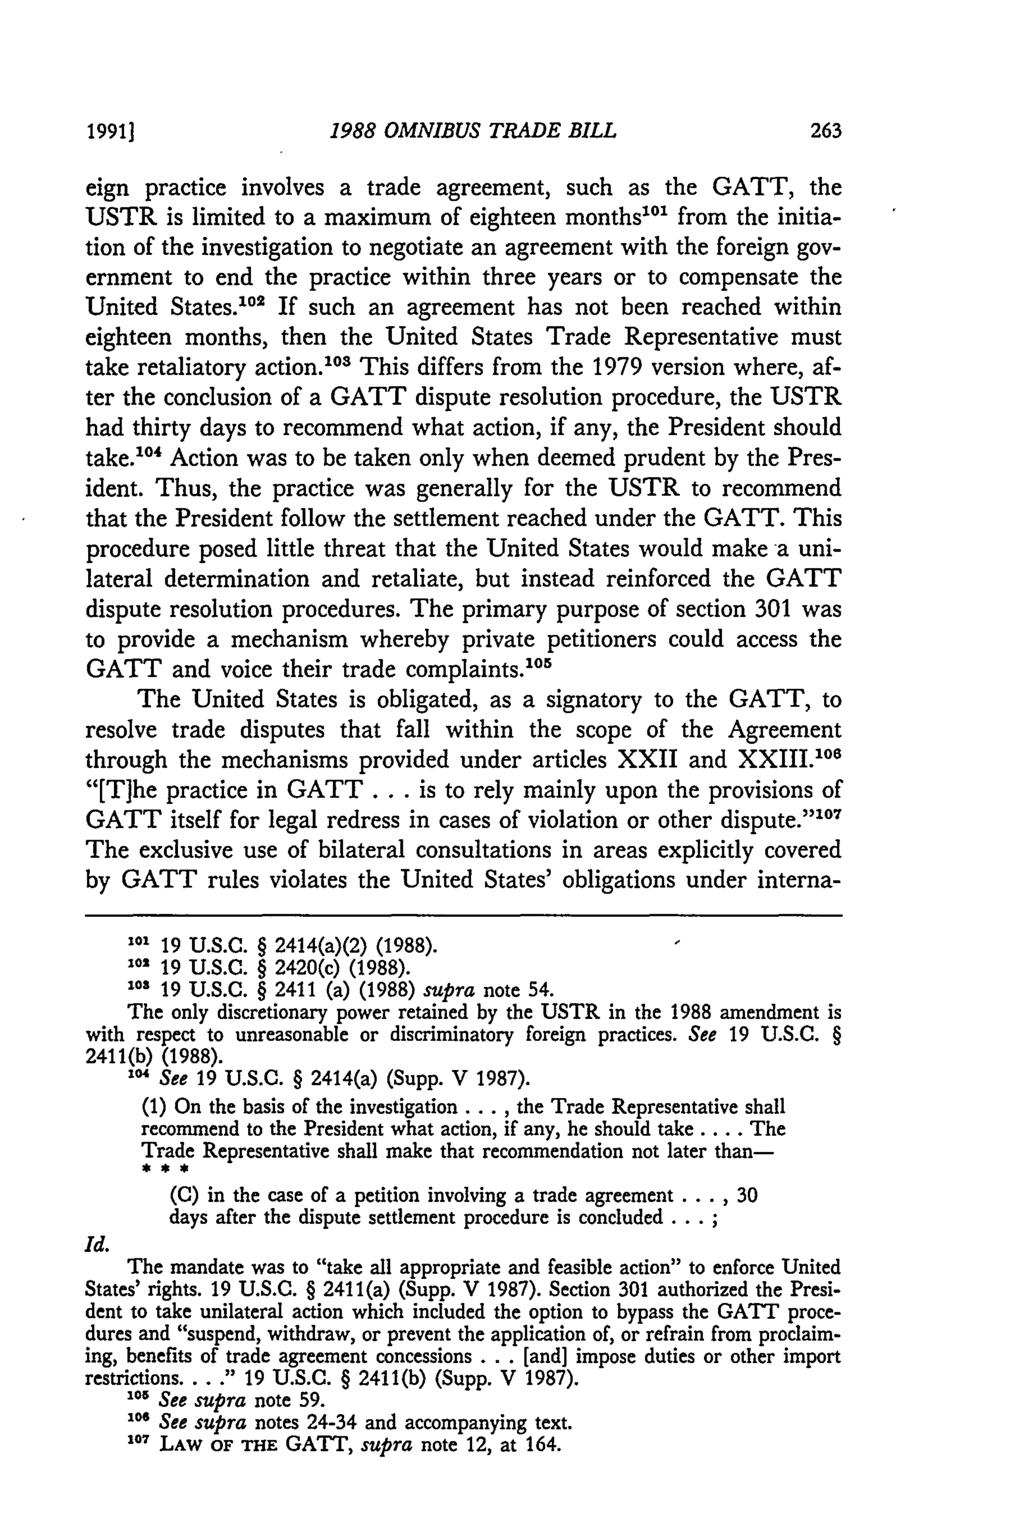 1991] 1988 OMNIBUS TRADE BILL eign practice involves a trade agreement, such as the GATT, the USTR is limited to a maximum of eighteen monthso'' from the initiation of the investigation to negotiate